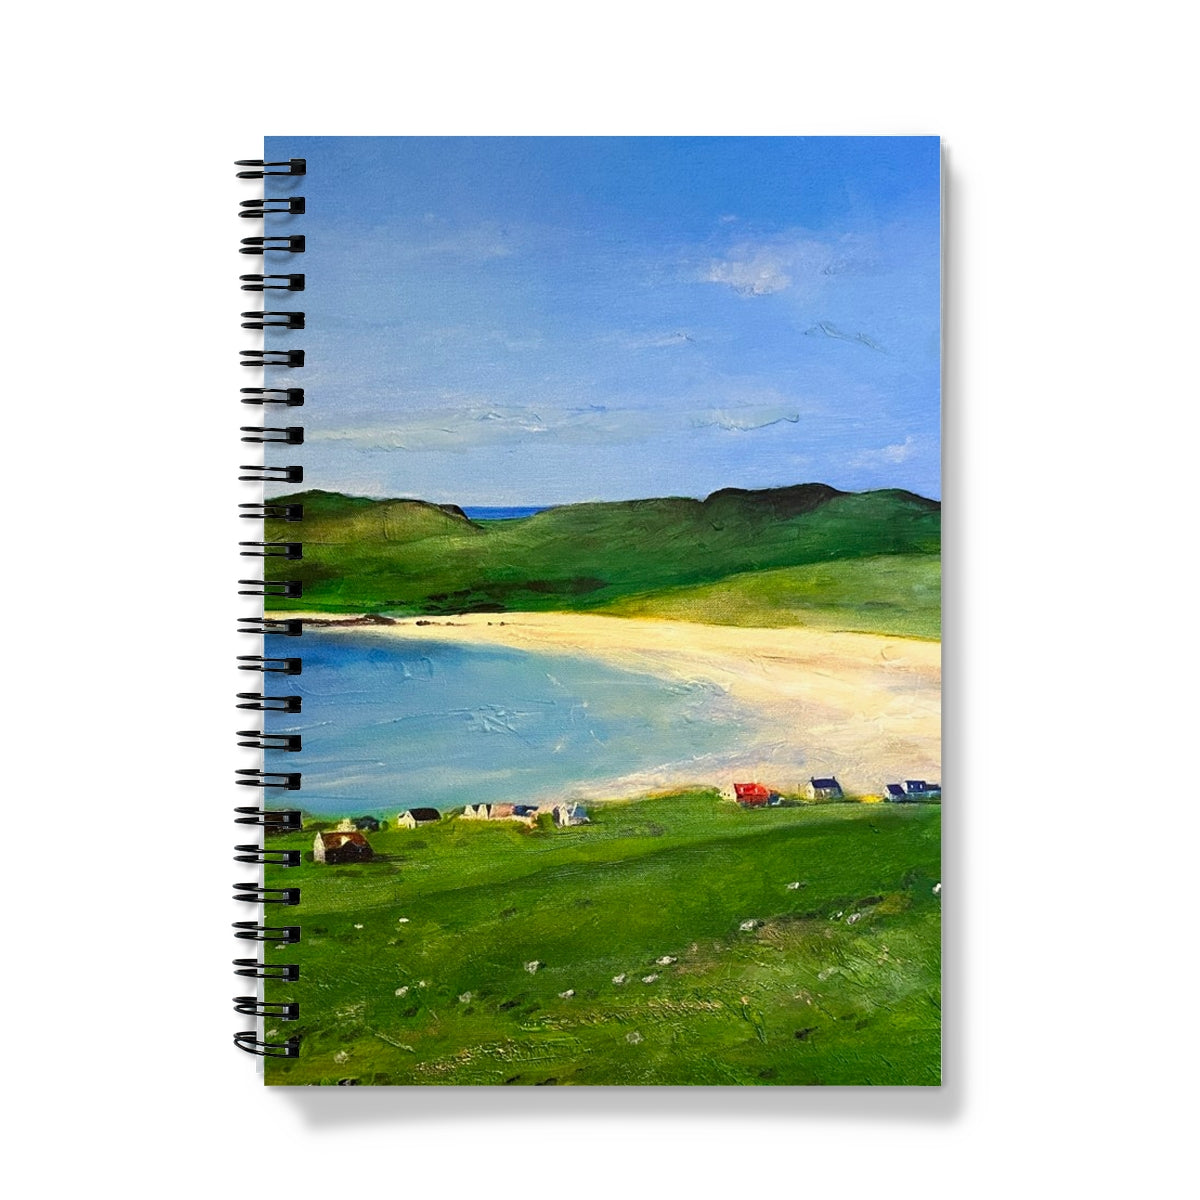 Balephuil Beach Tiree Art Gifts Notebook-Journals & Notebooks-Hebridean Islands Art Gallery-A5-Lined-Paintings, Prints, Homeware, Art Gifts From Scotland By Scottish Artist Kevin Hunter